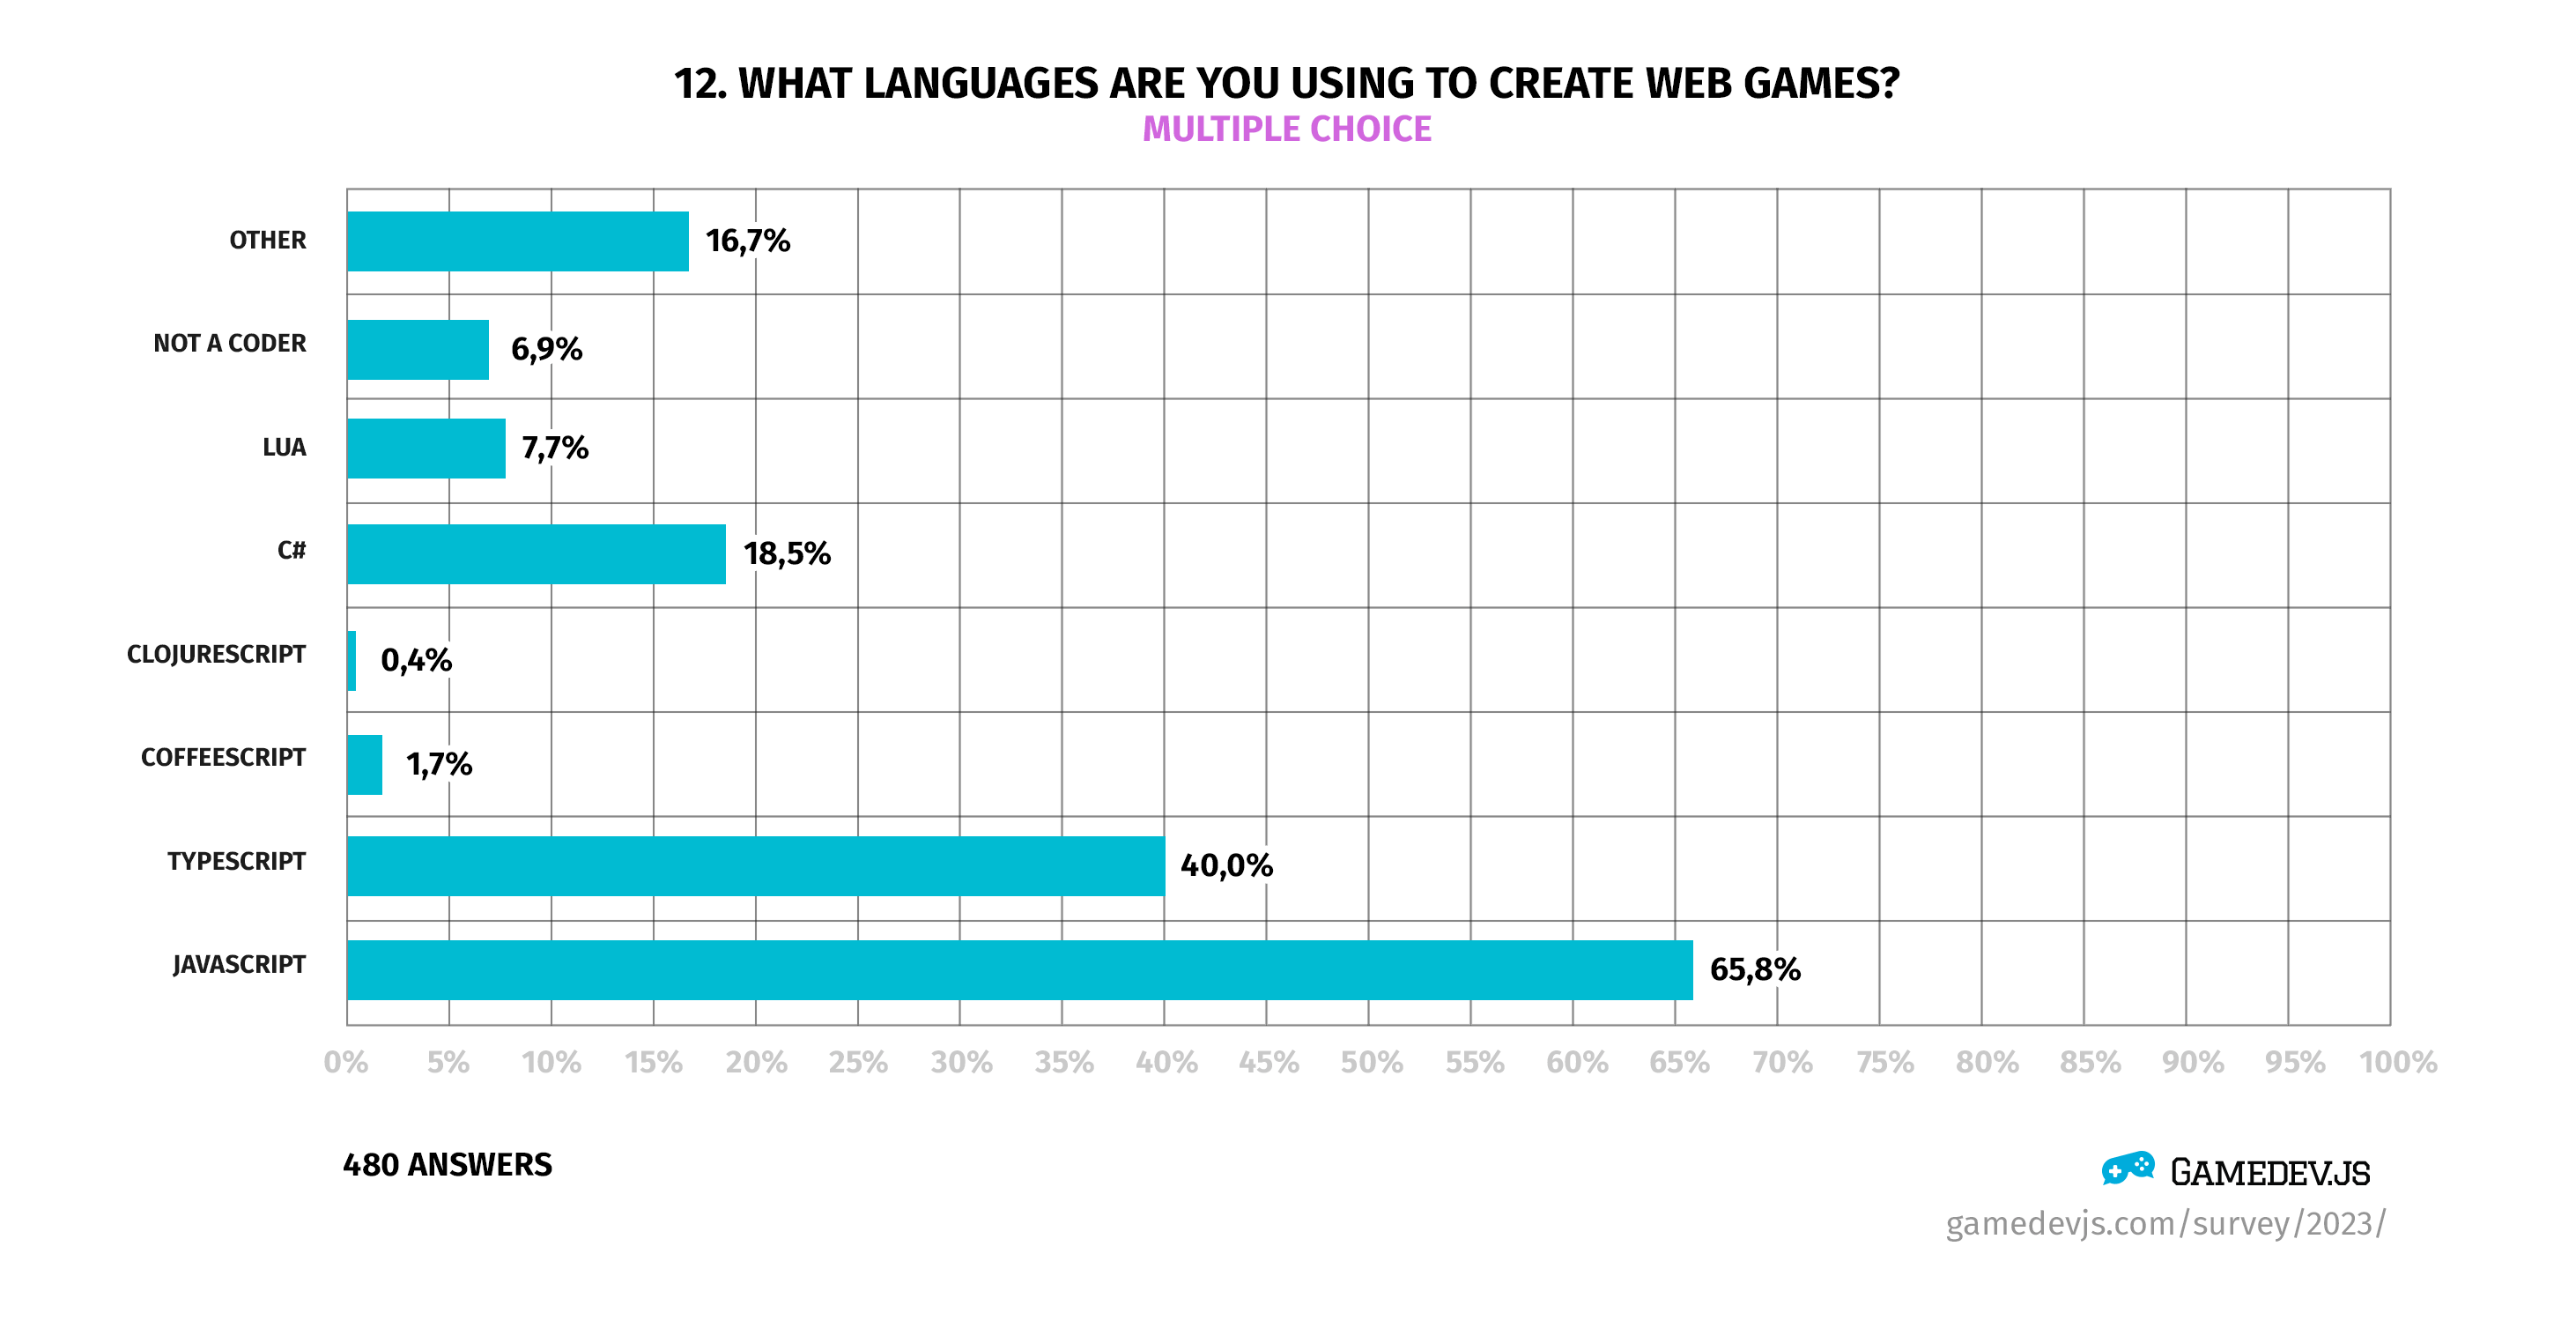 Gamedev.js Survey 2023 - Question #12: What languages are you using to create web games?